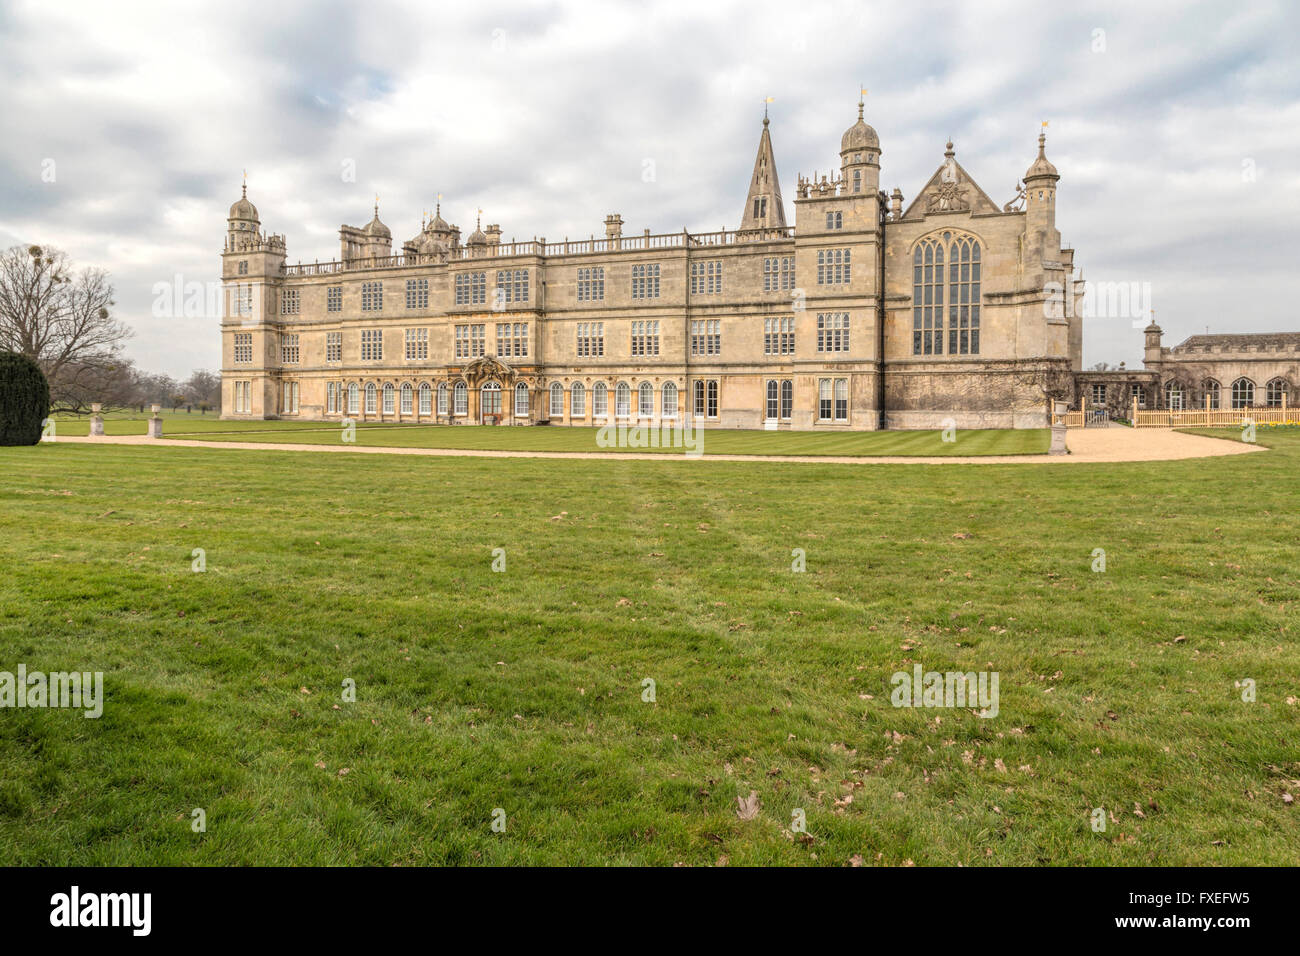 View on Burghley House, a 16th-century country house, Stamford, Lincolnshire / Cambridgeshire, England, United Kingdom. Stock Photo